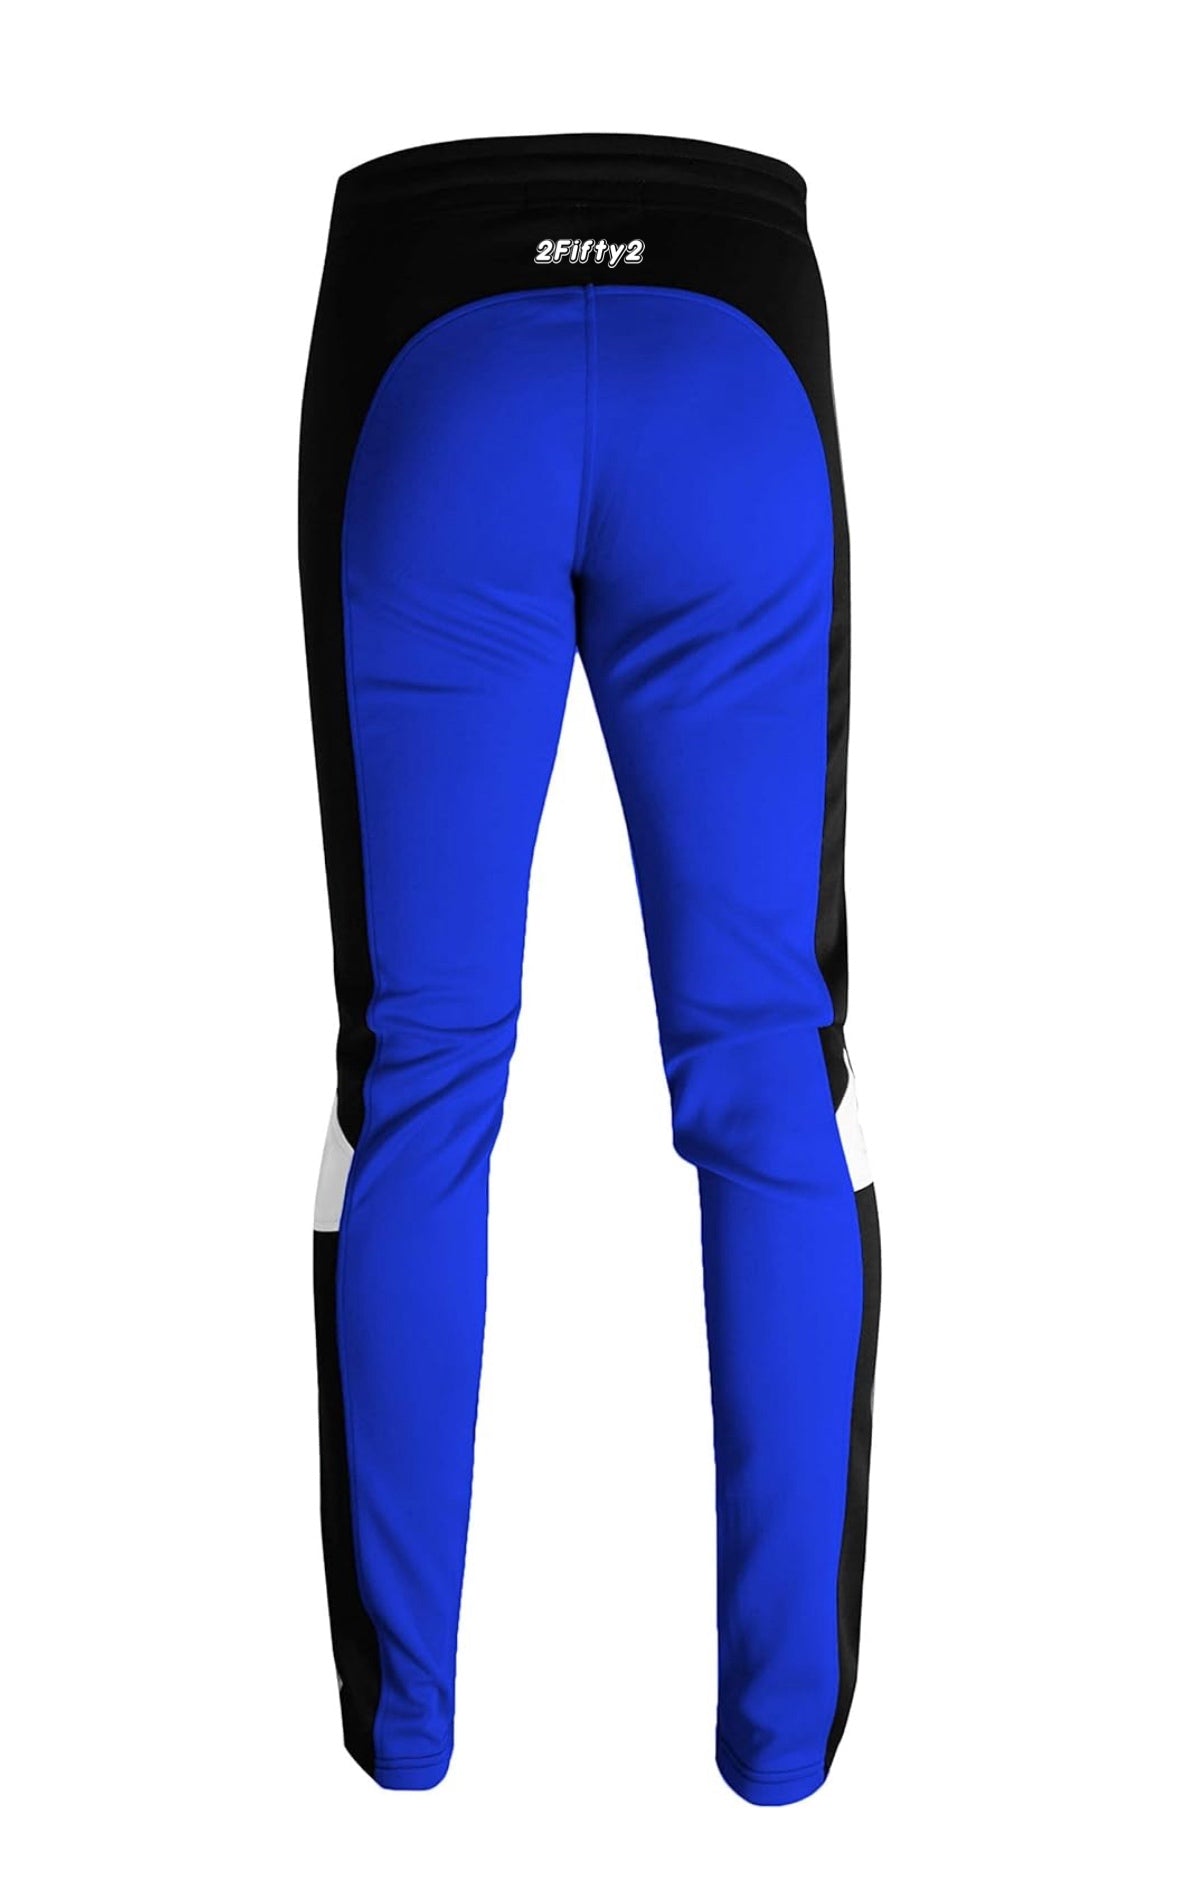 Men’s Slim fit Track pants by 2fifty2